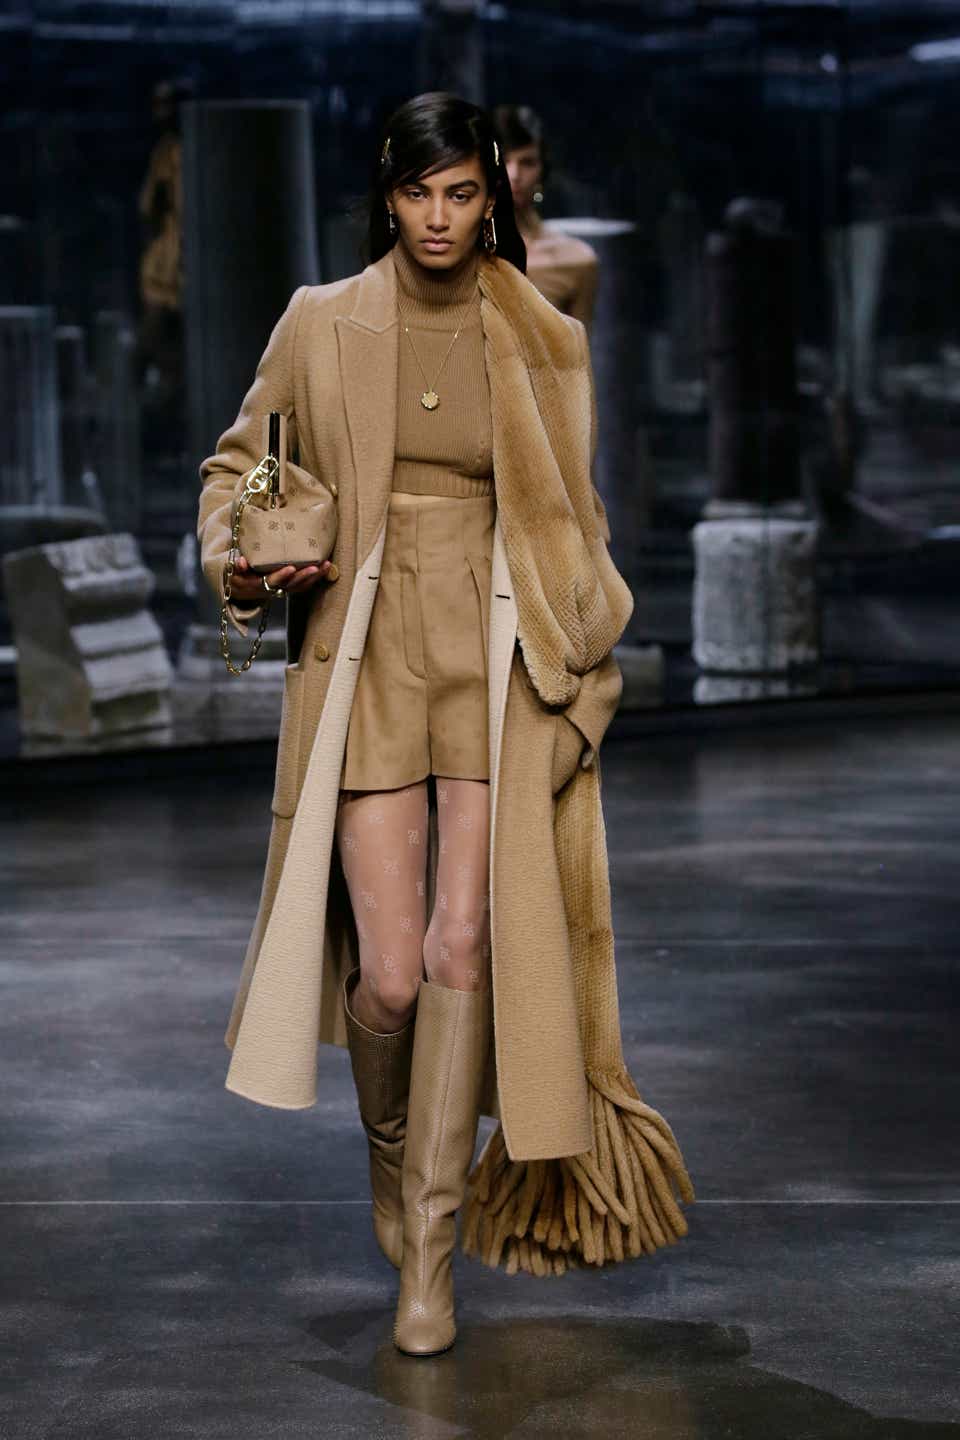 Model wearing a camel coat and matching fur scarf at the Fendi fall '21 show.